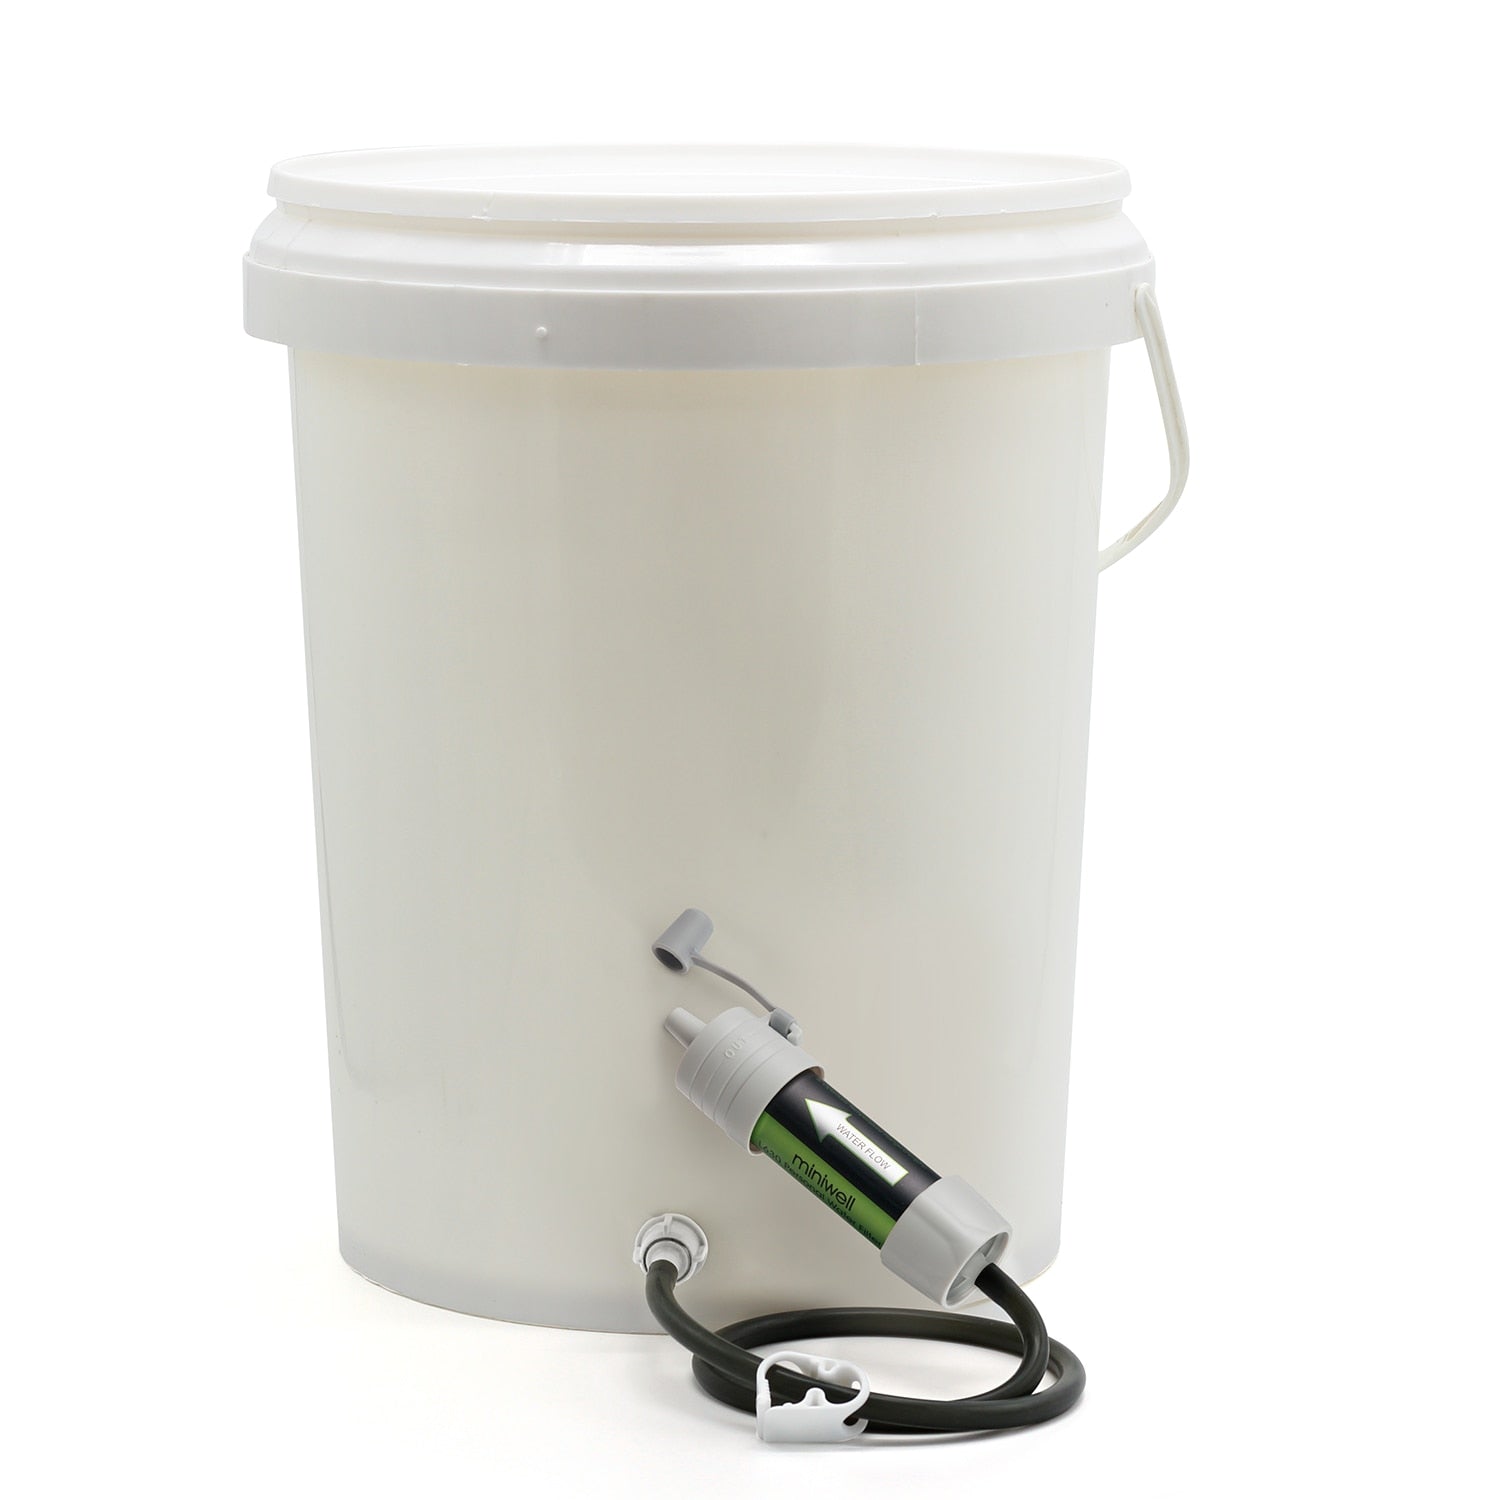 Kits Miniwell L630 Draagbare Water Filter Apparatuur Voor Militaire Survival